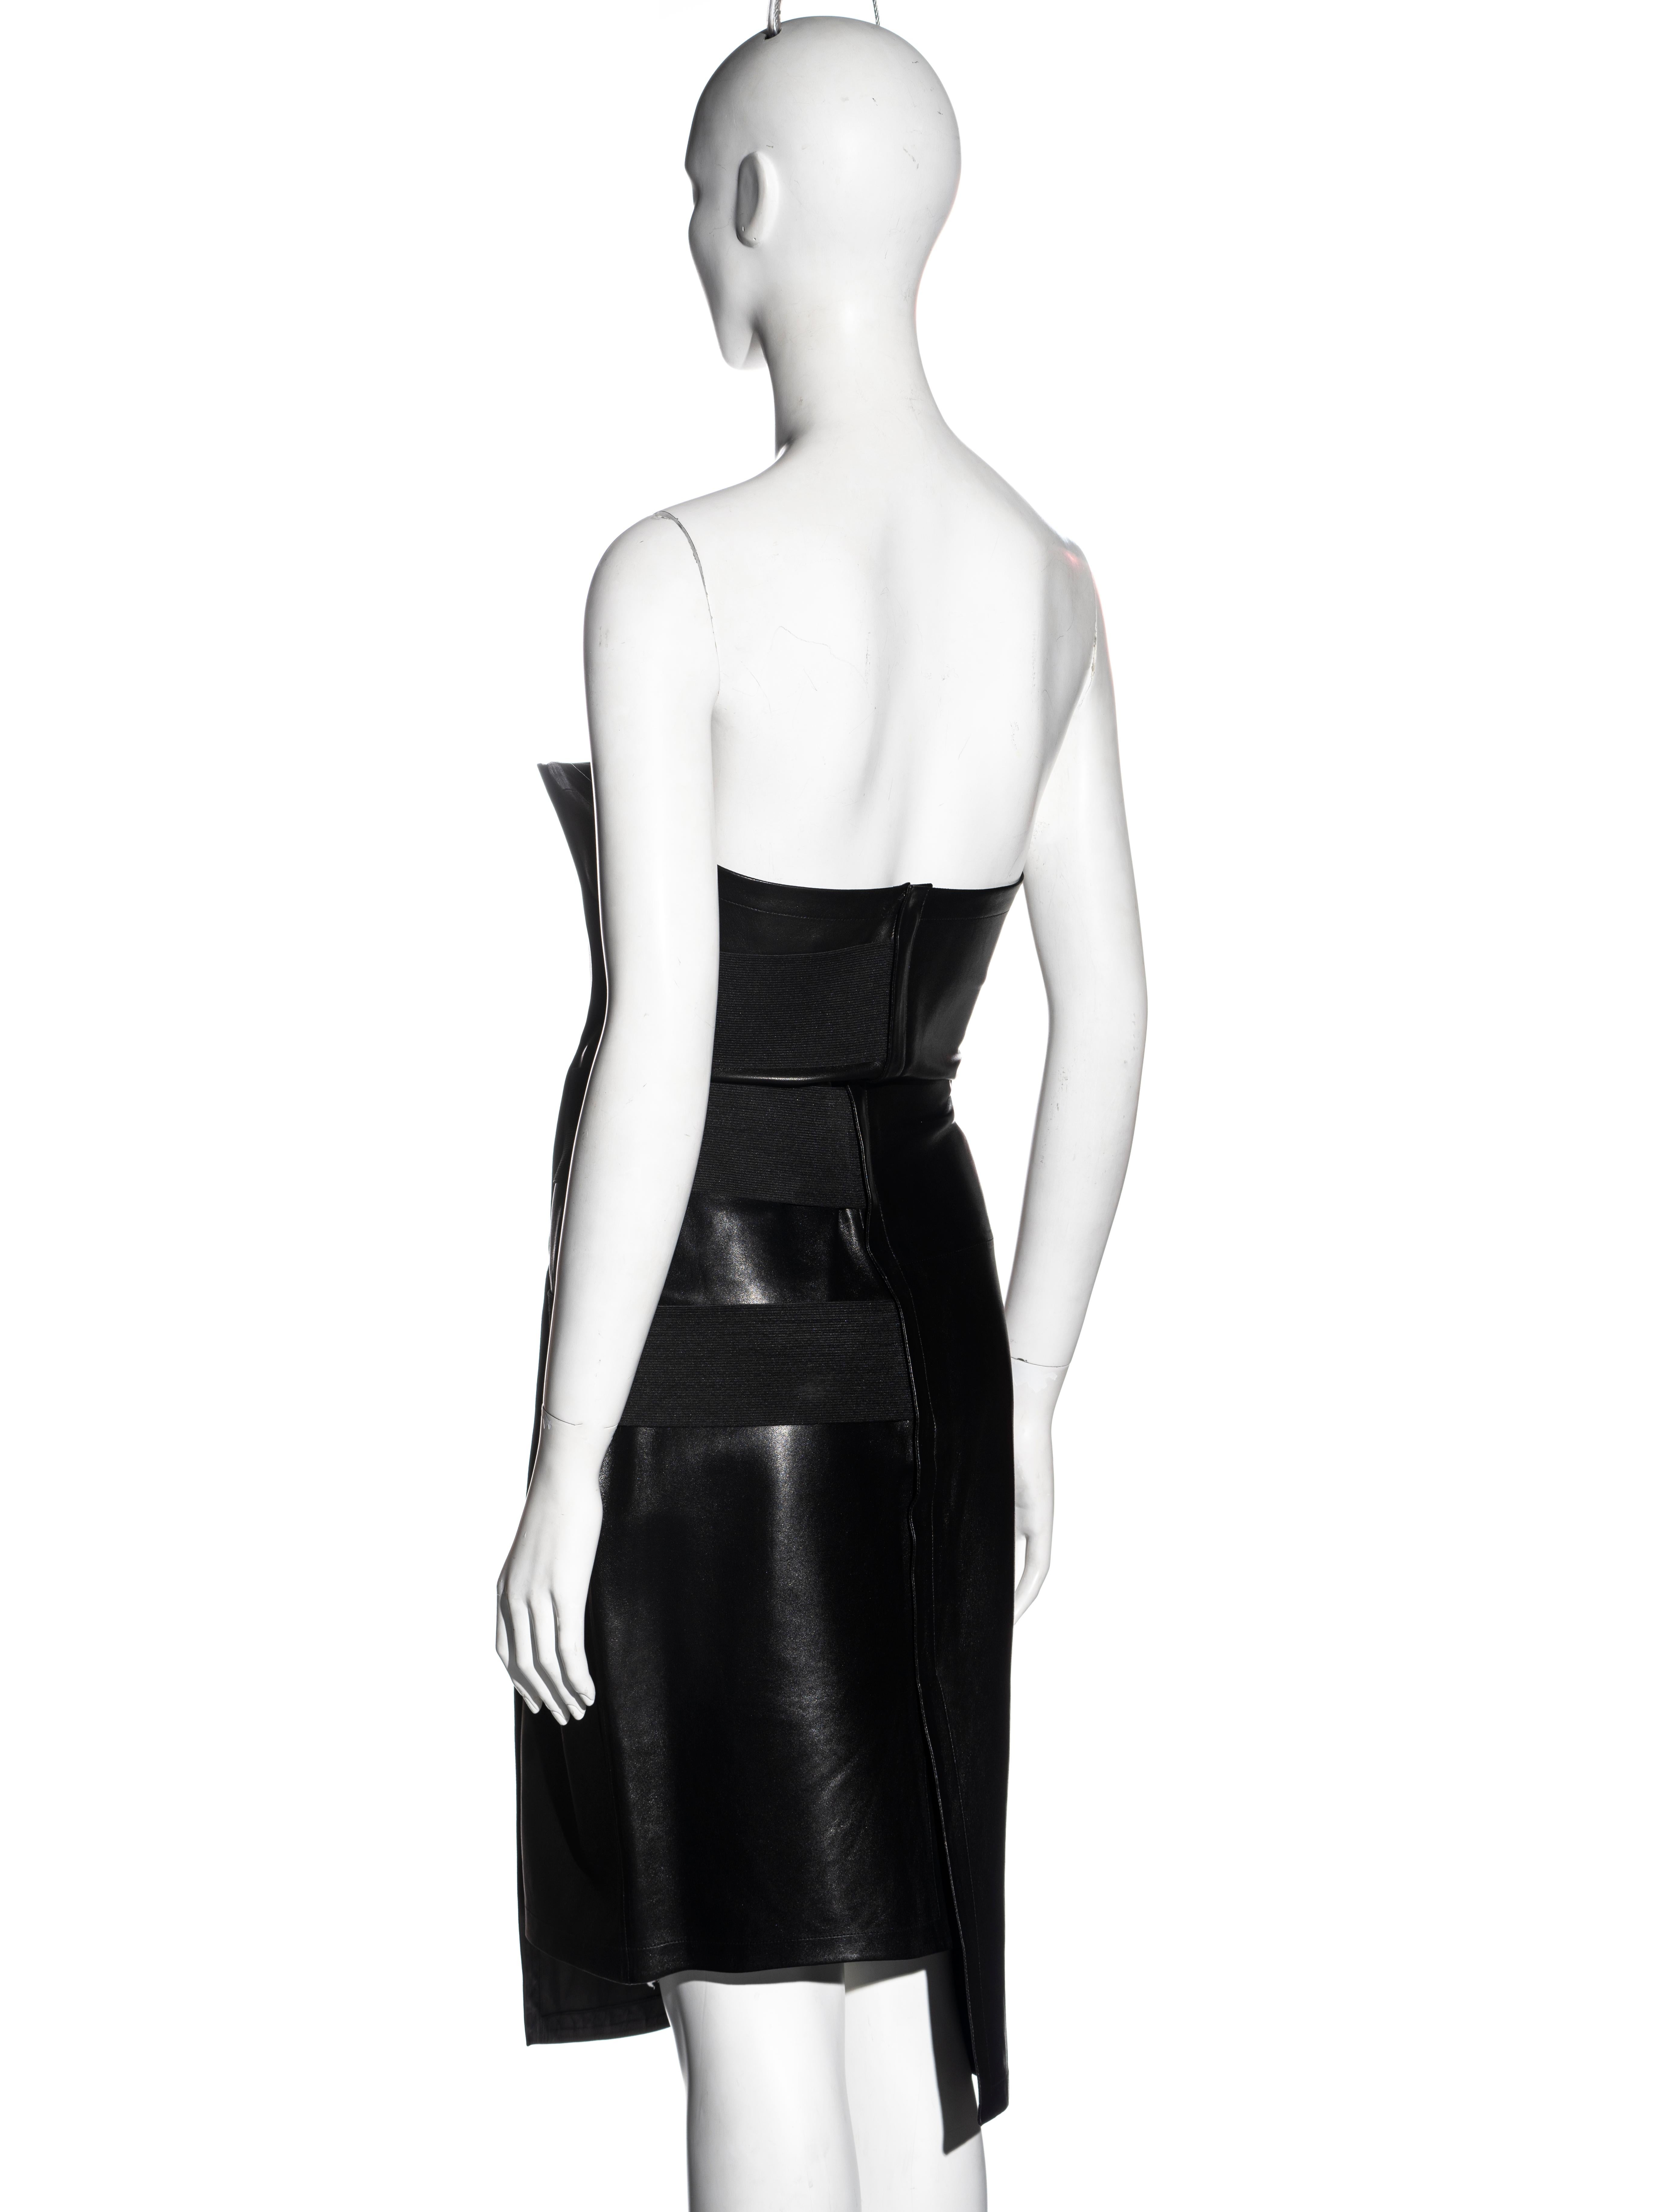 Yves Saint Laurent by Tom Ford black leather strapless wrap dress, ss 2001 1